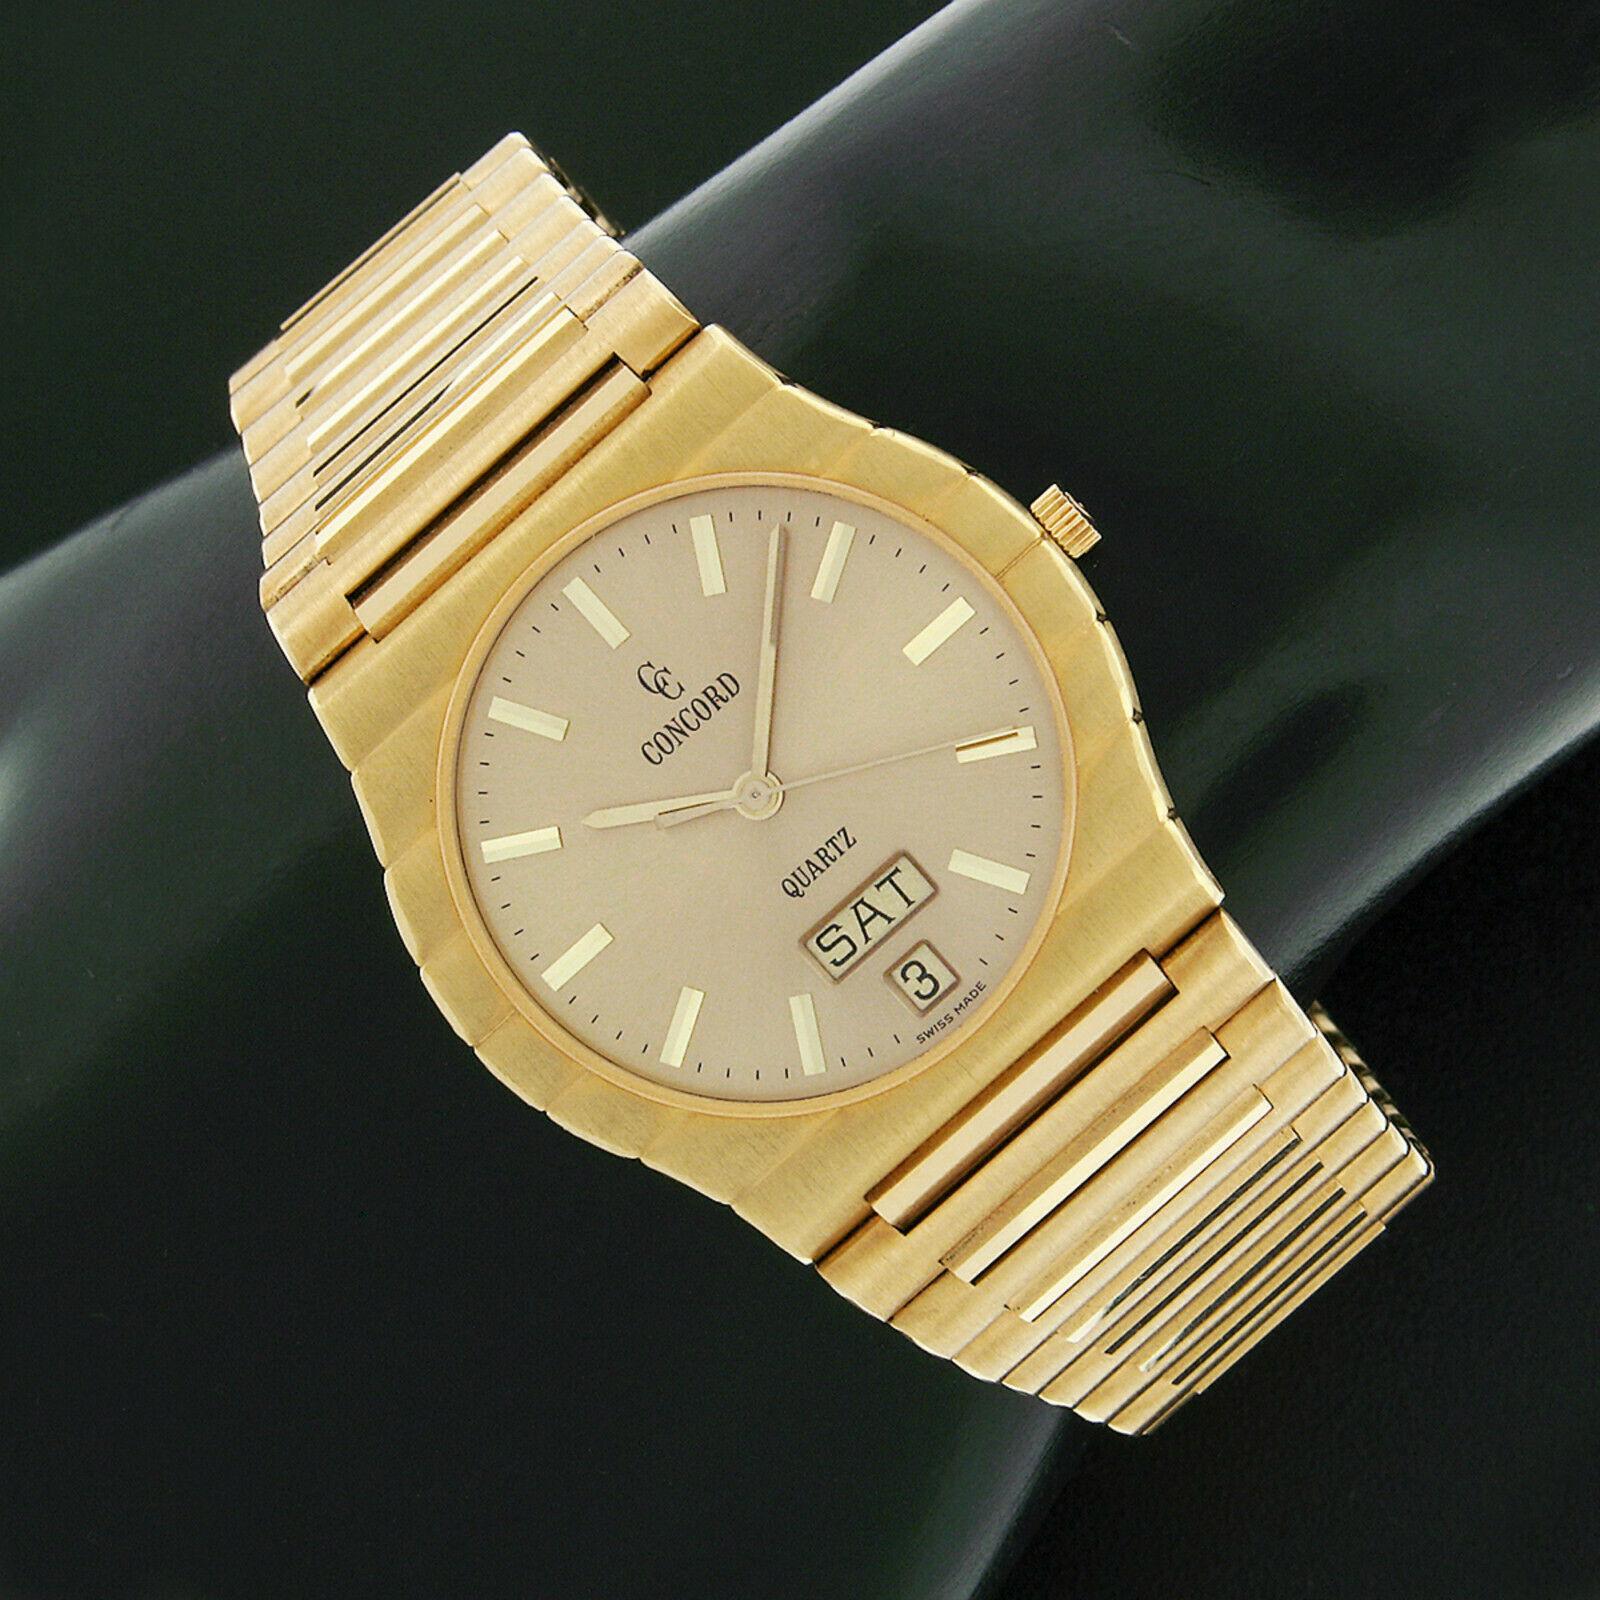 Here we have a classy vintage Concord wrist watch that was crafted in Switzerland from solid 18k yellow gold. This beautiful watch features a Swiss-made, battery powered, quartz movement that is in perfect working condition and keeps accurate time.